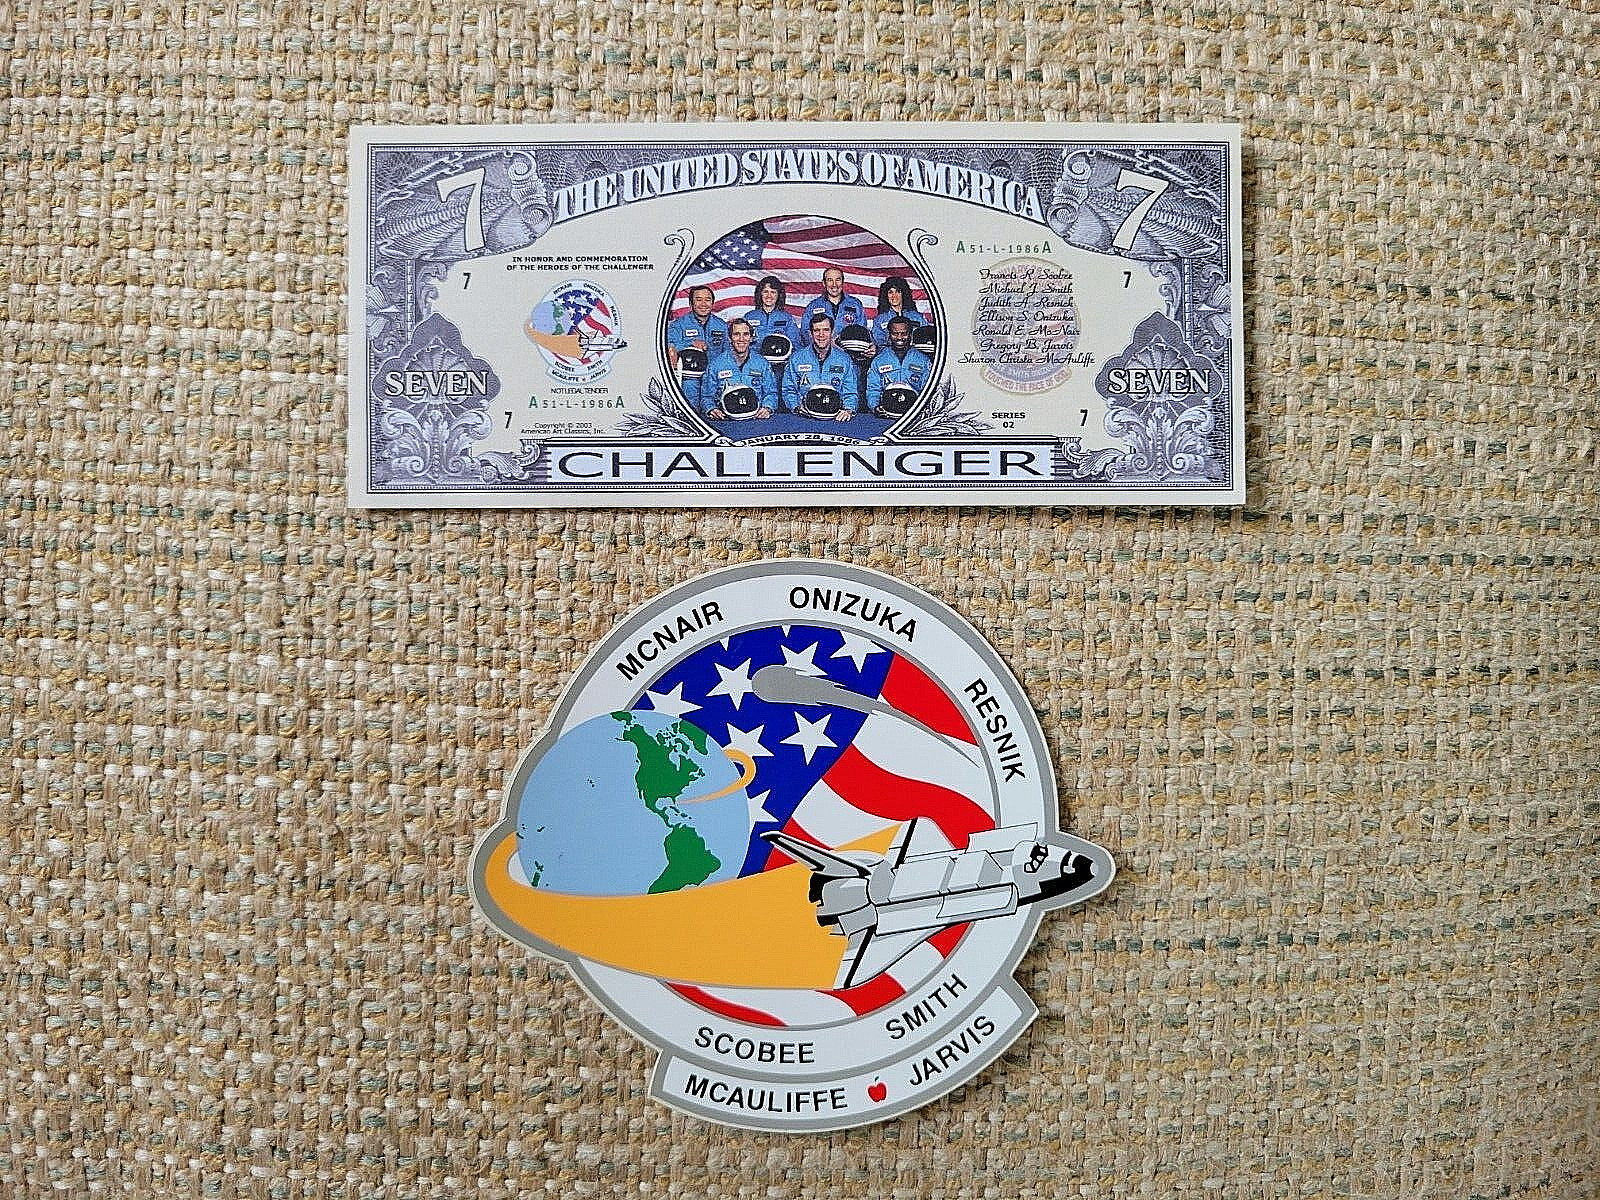 LOT OF 2 - NASA SPACE SHUTTLE STS-51L - Vintage DECAL & Challenger Novelty Money